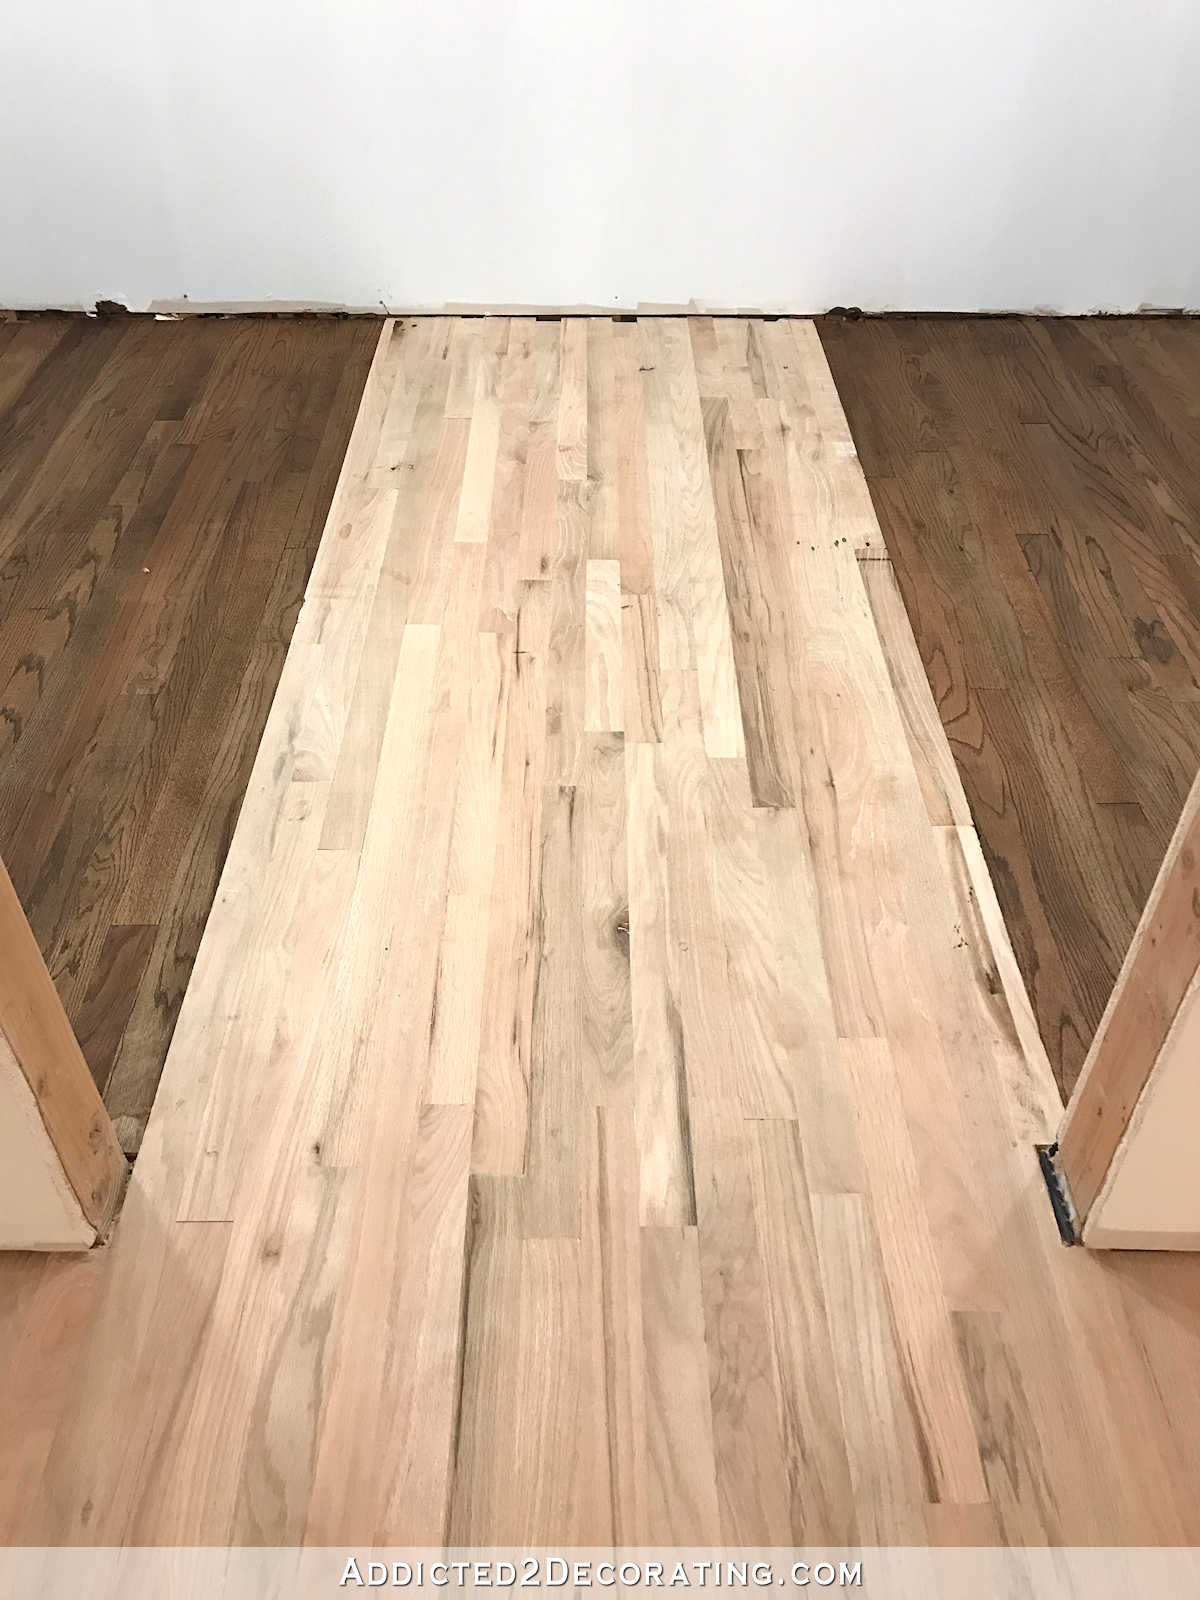 2 red oak hardwood flooring of adventures in staining my red oak hardwood floors products process regarding staining red oak hardwood floors 11 stain on left and right sides of the